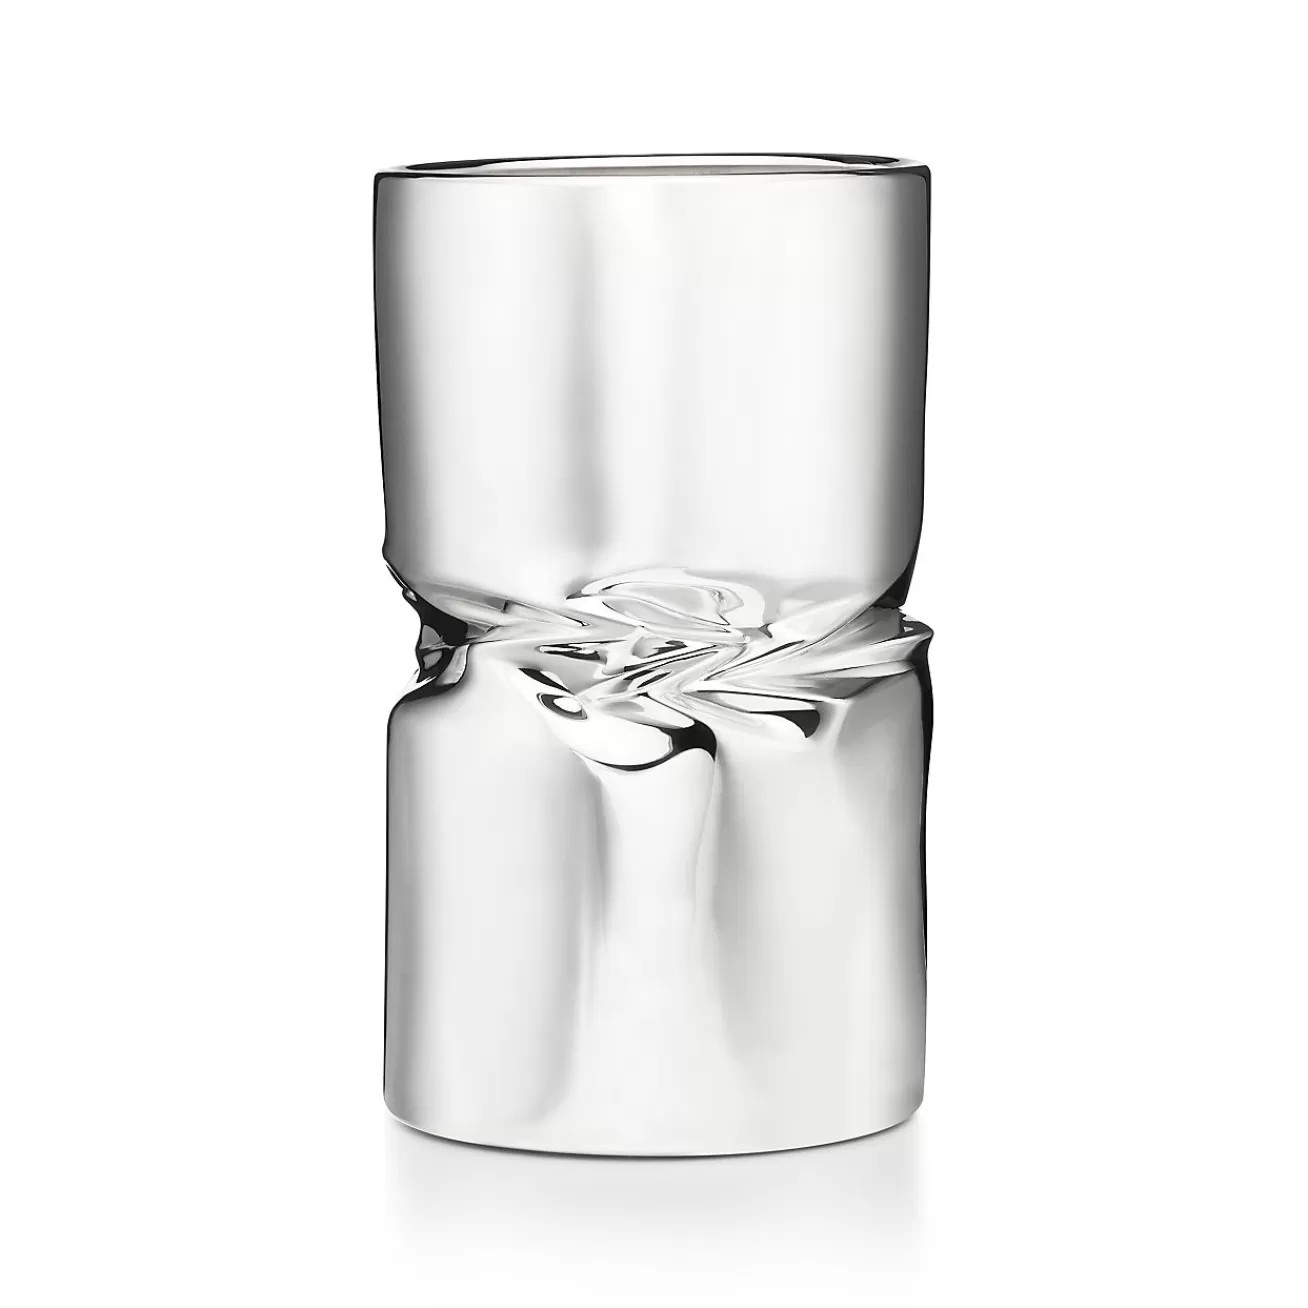 Tiffany & Co. Tiffany Silver Crush Vase in Sterling Silver | ^ The Home | Housewarming Gifts